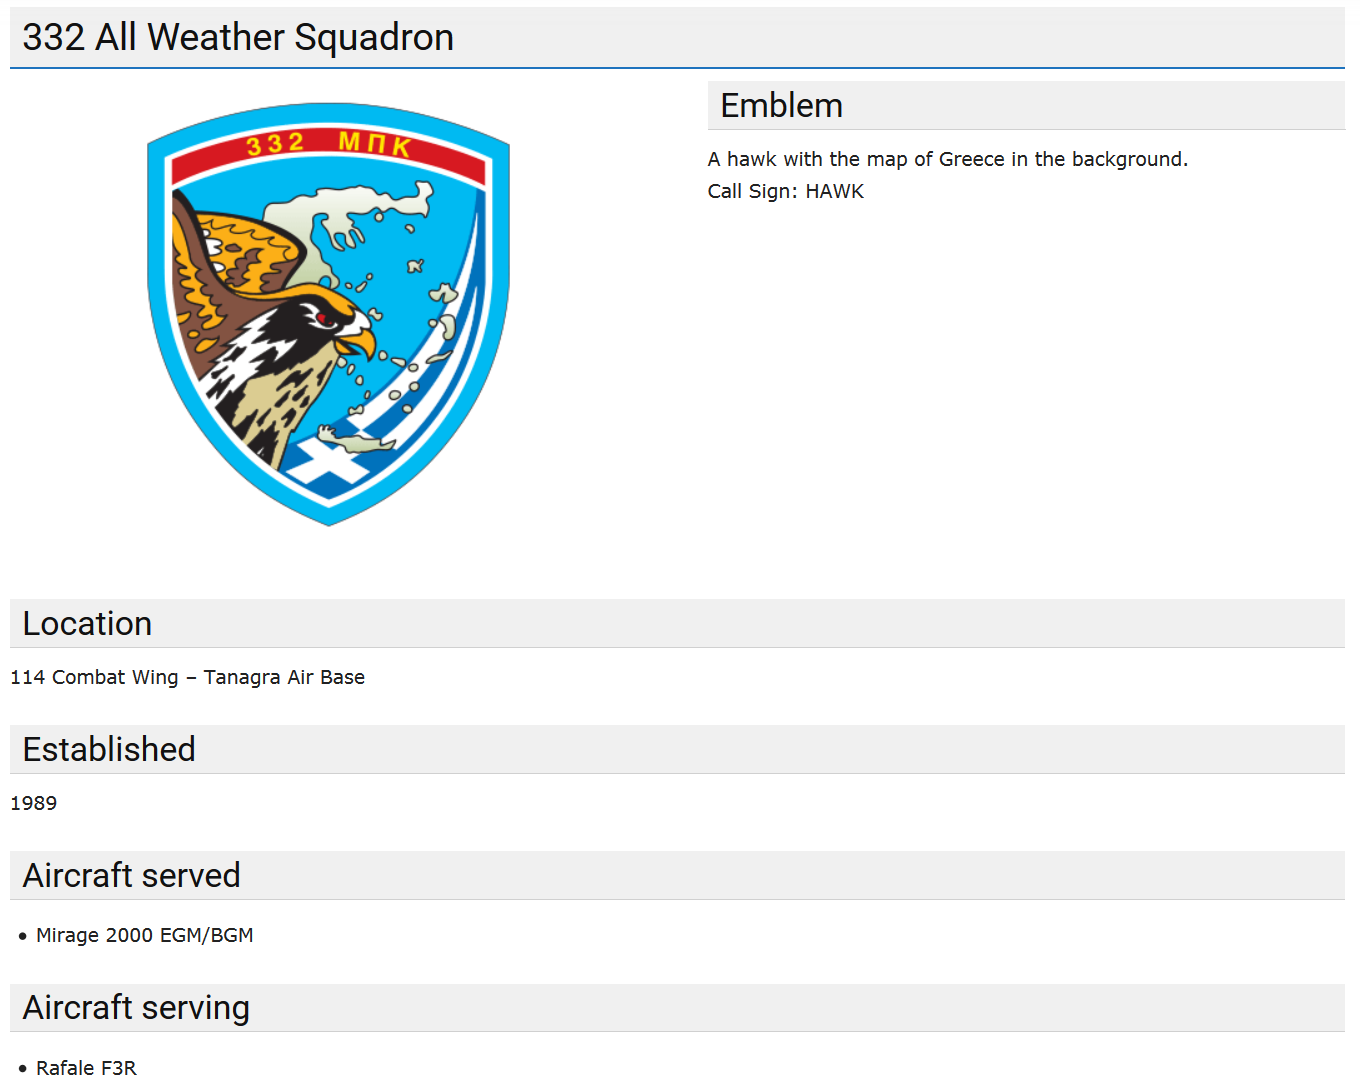 Screenshot_2022-07-22 332 All Weather Squadron - Hellenic Air Force.png